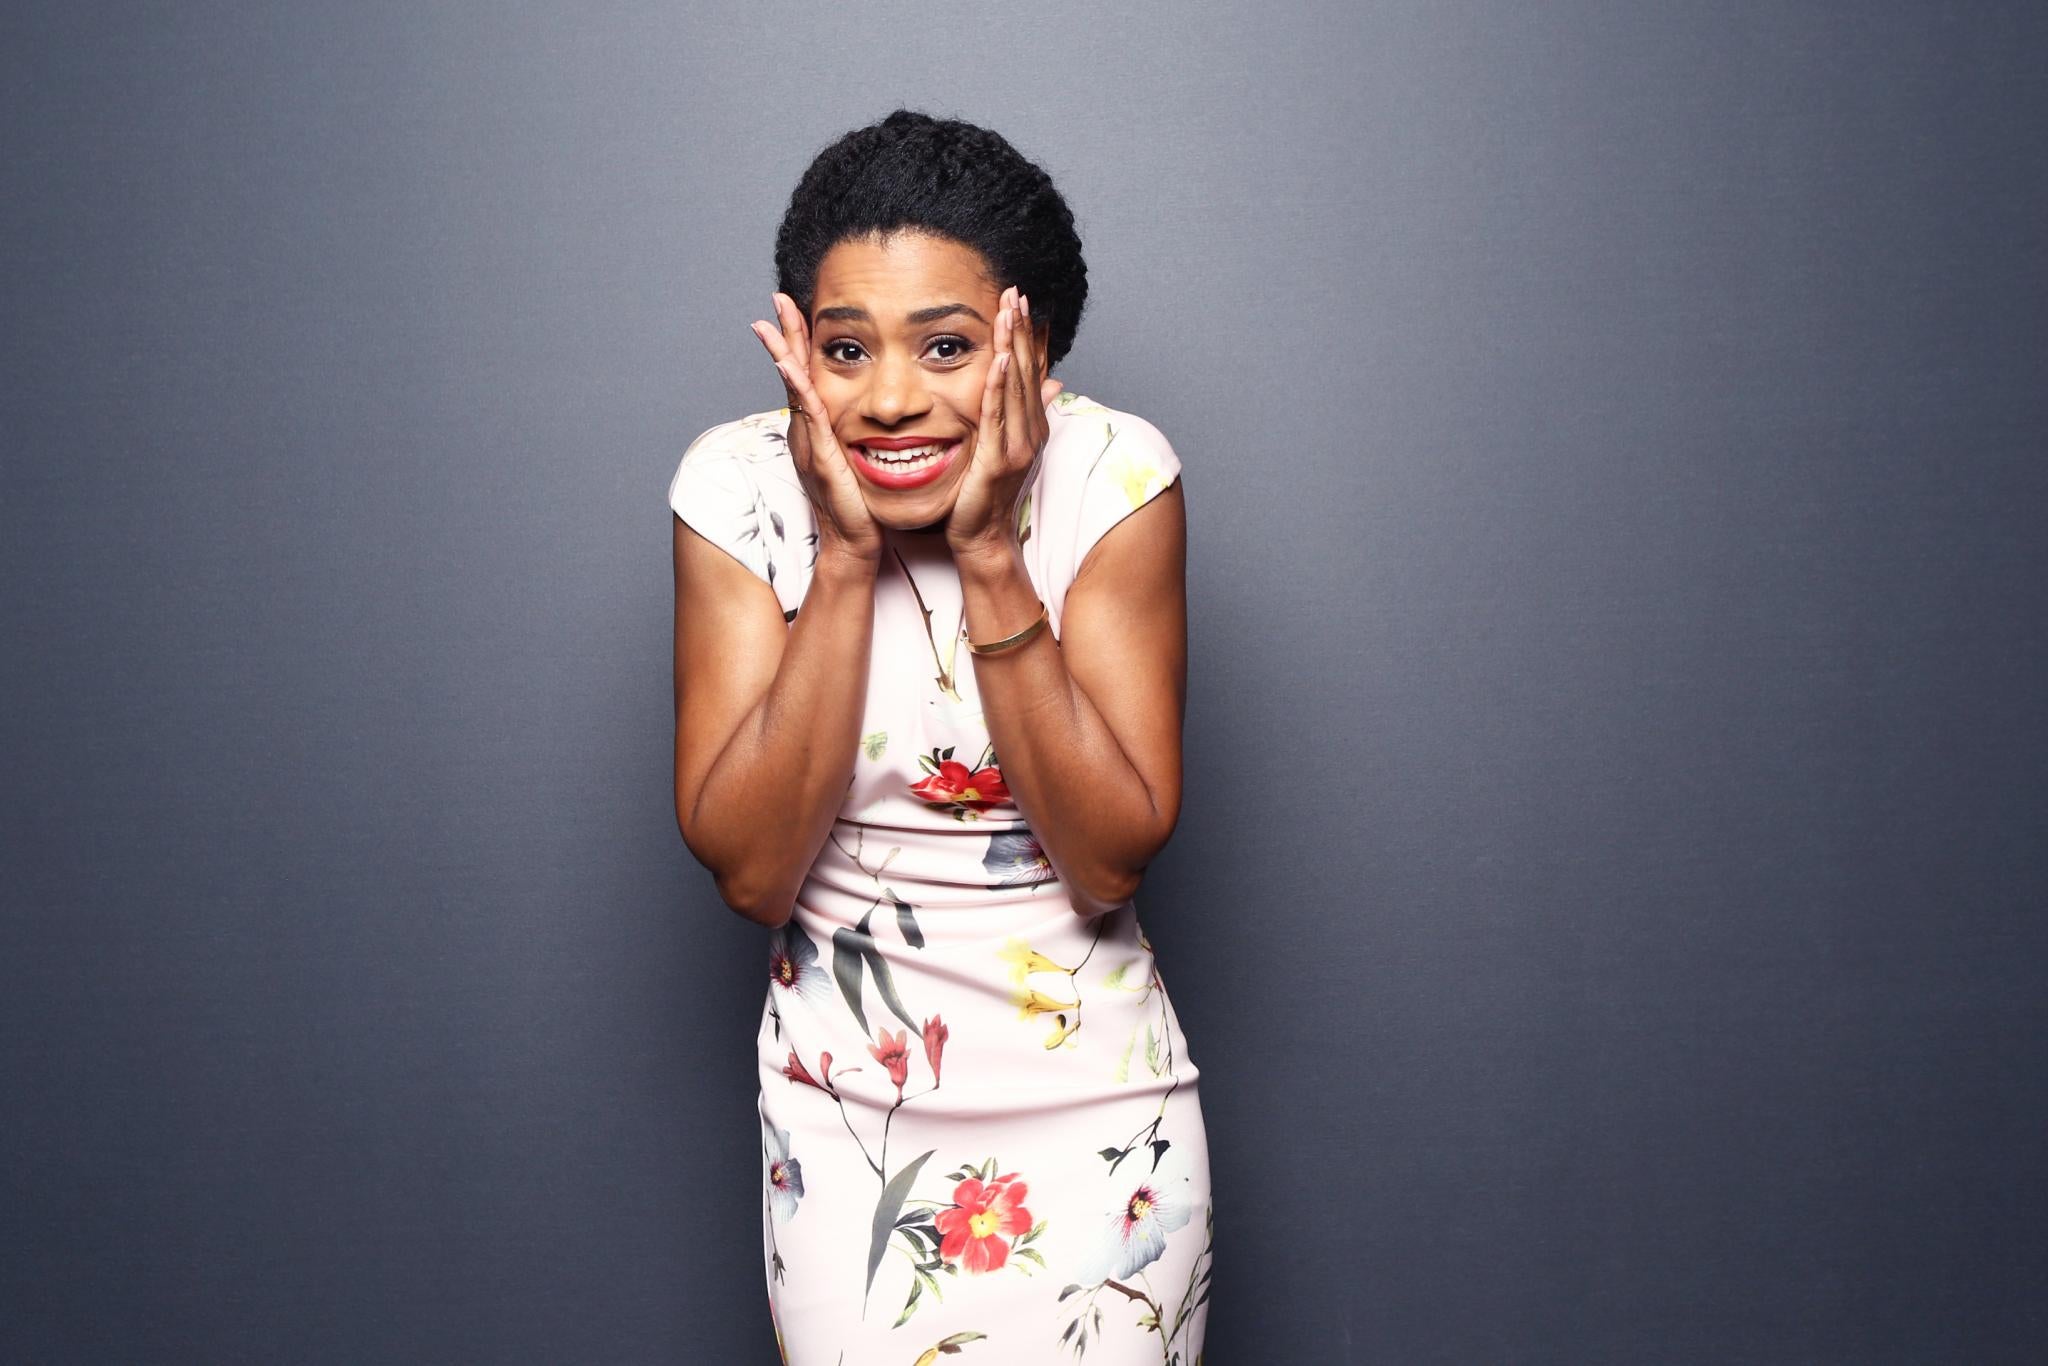 EXCLUSIVE: ESSENCE's 2015 Black Women in Hollywood Photo Booth